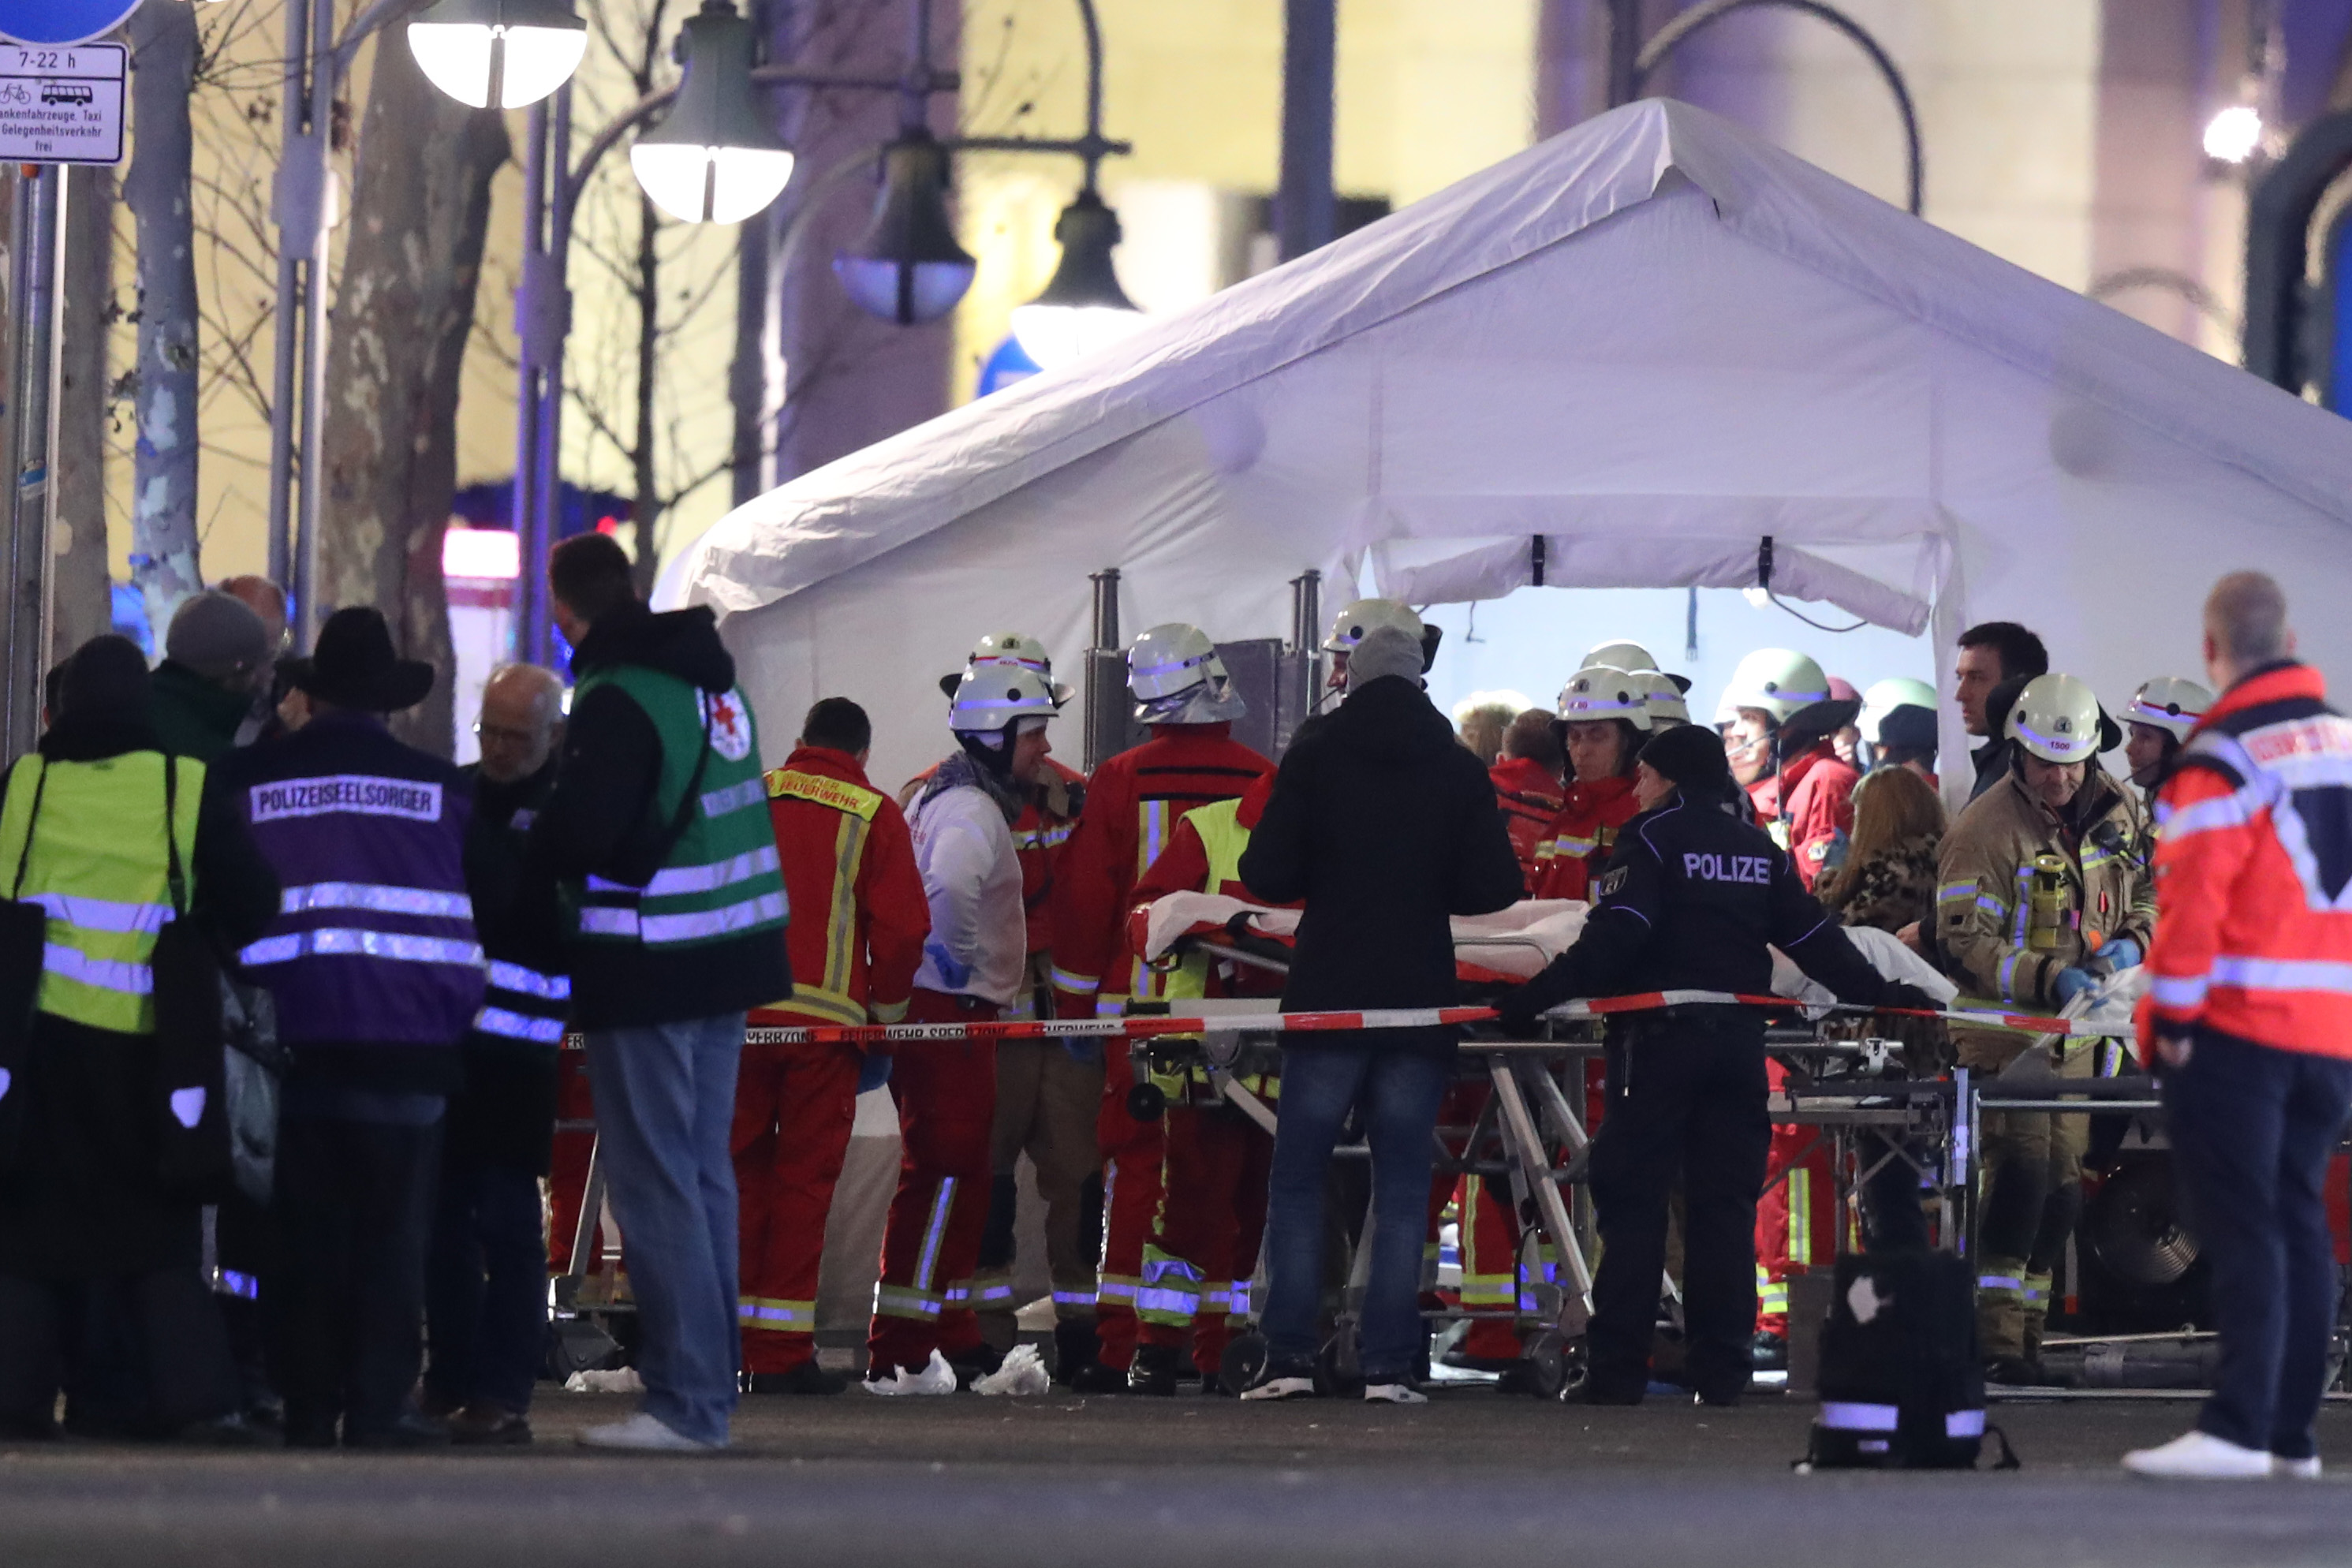 Rescue workers gather with stretchers outside a tent in the area after a lorry plowed through a Christmas market on December 19, 2016 in Berlin, Germany. (Sean Gallup—Getty Images)